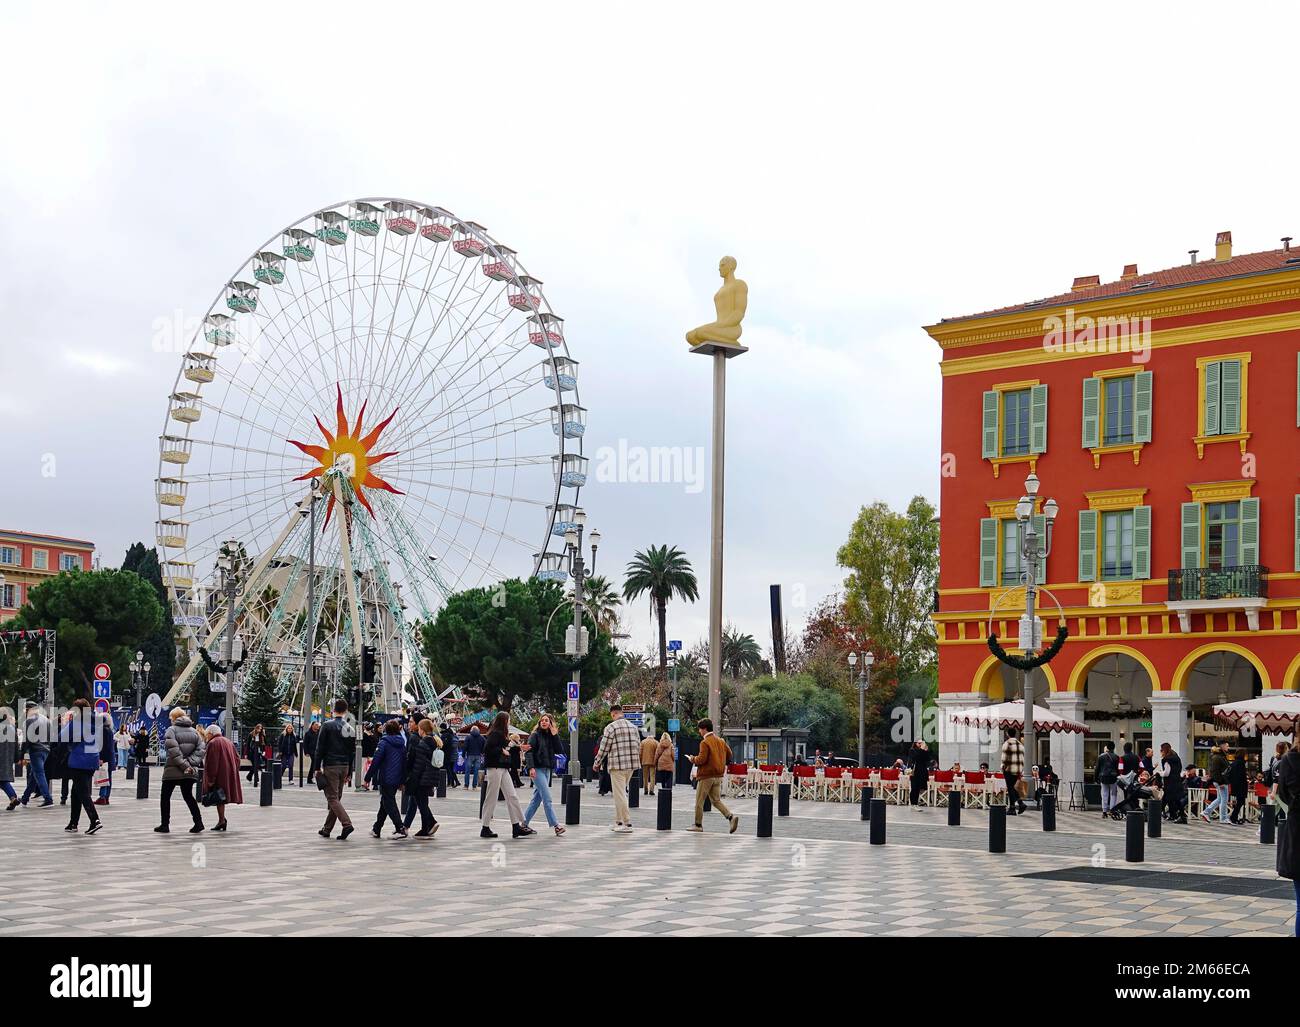 Central Square - Place Massena in Nice, Cote d'Azur, French Riviera. Nice, France - December 2022 Stock Photo